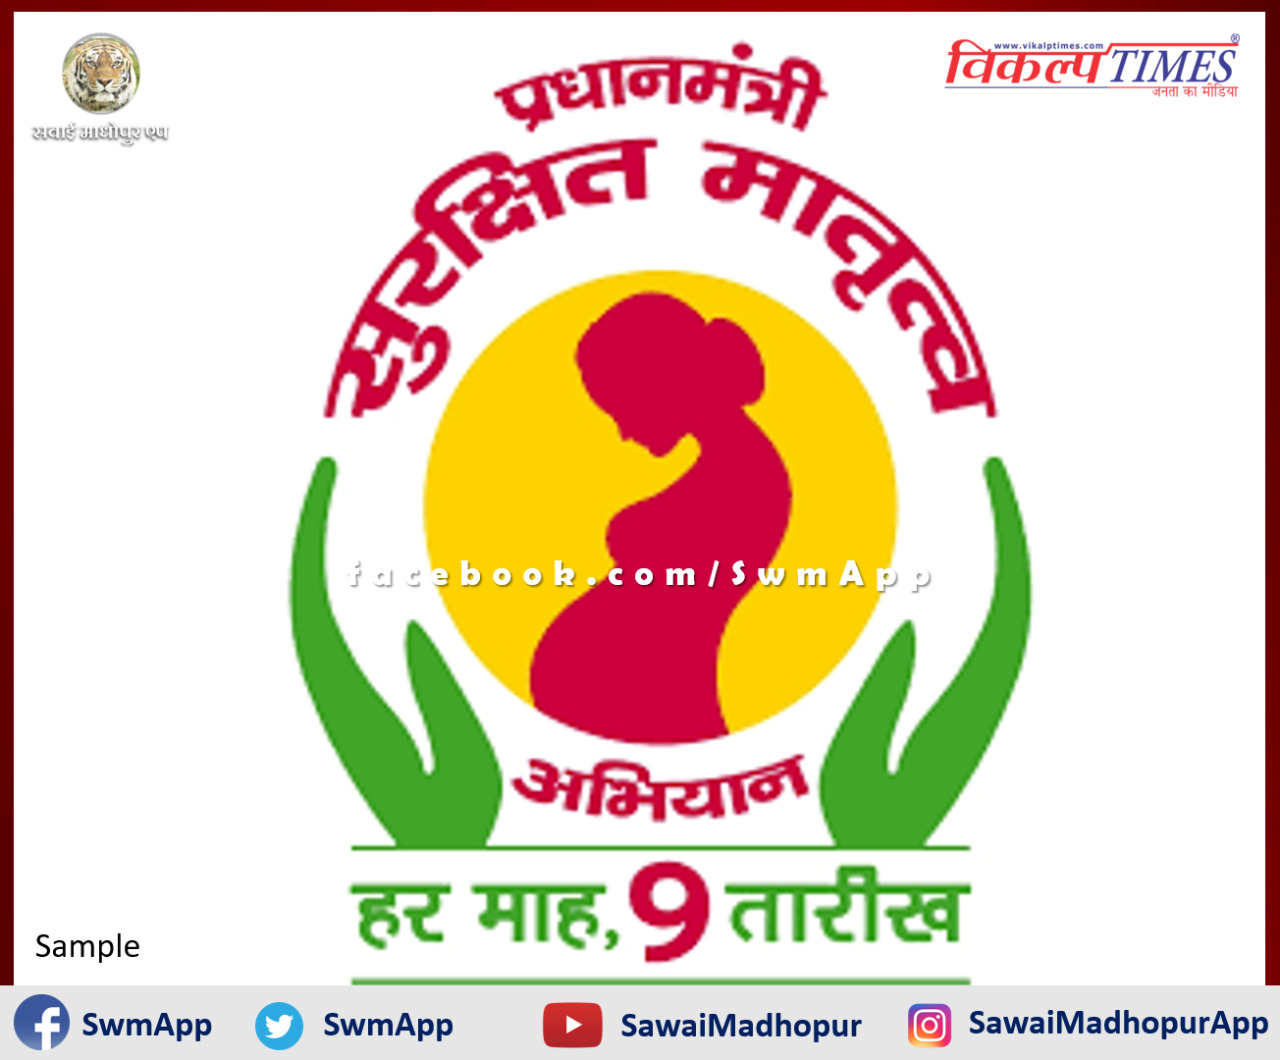 1372 pregnant women were screened in the Prime Minister's Safe Motherhood Campaign in sawai madhopur